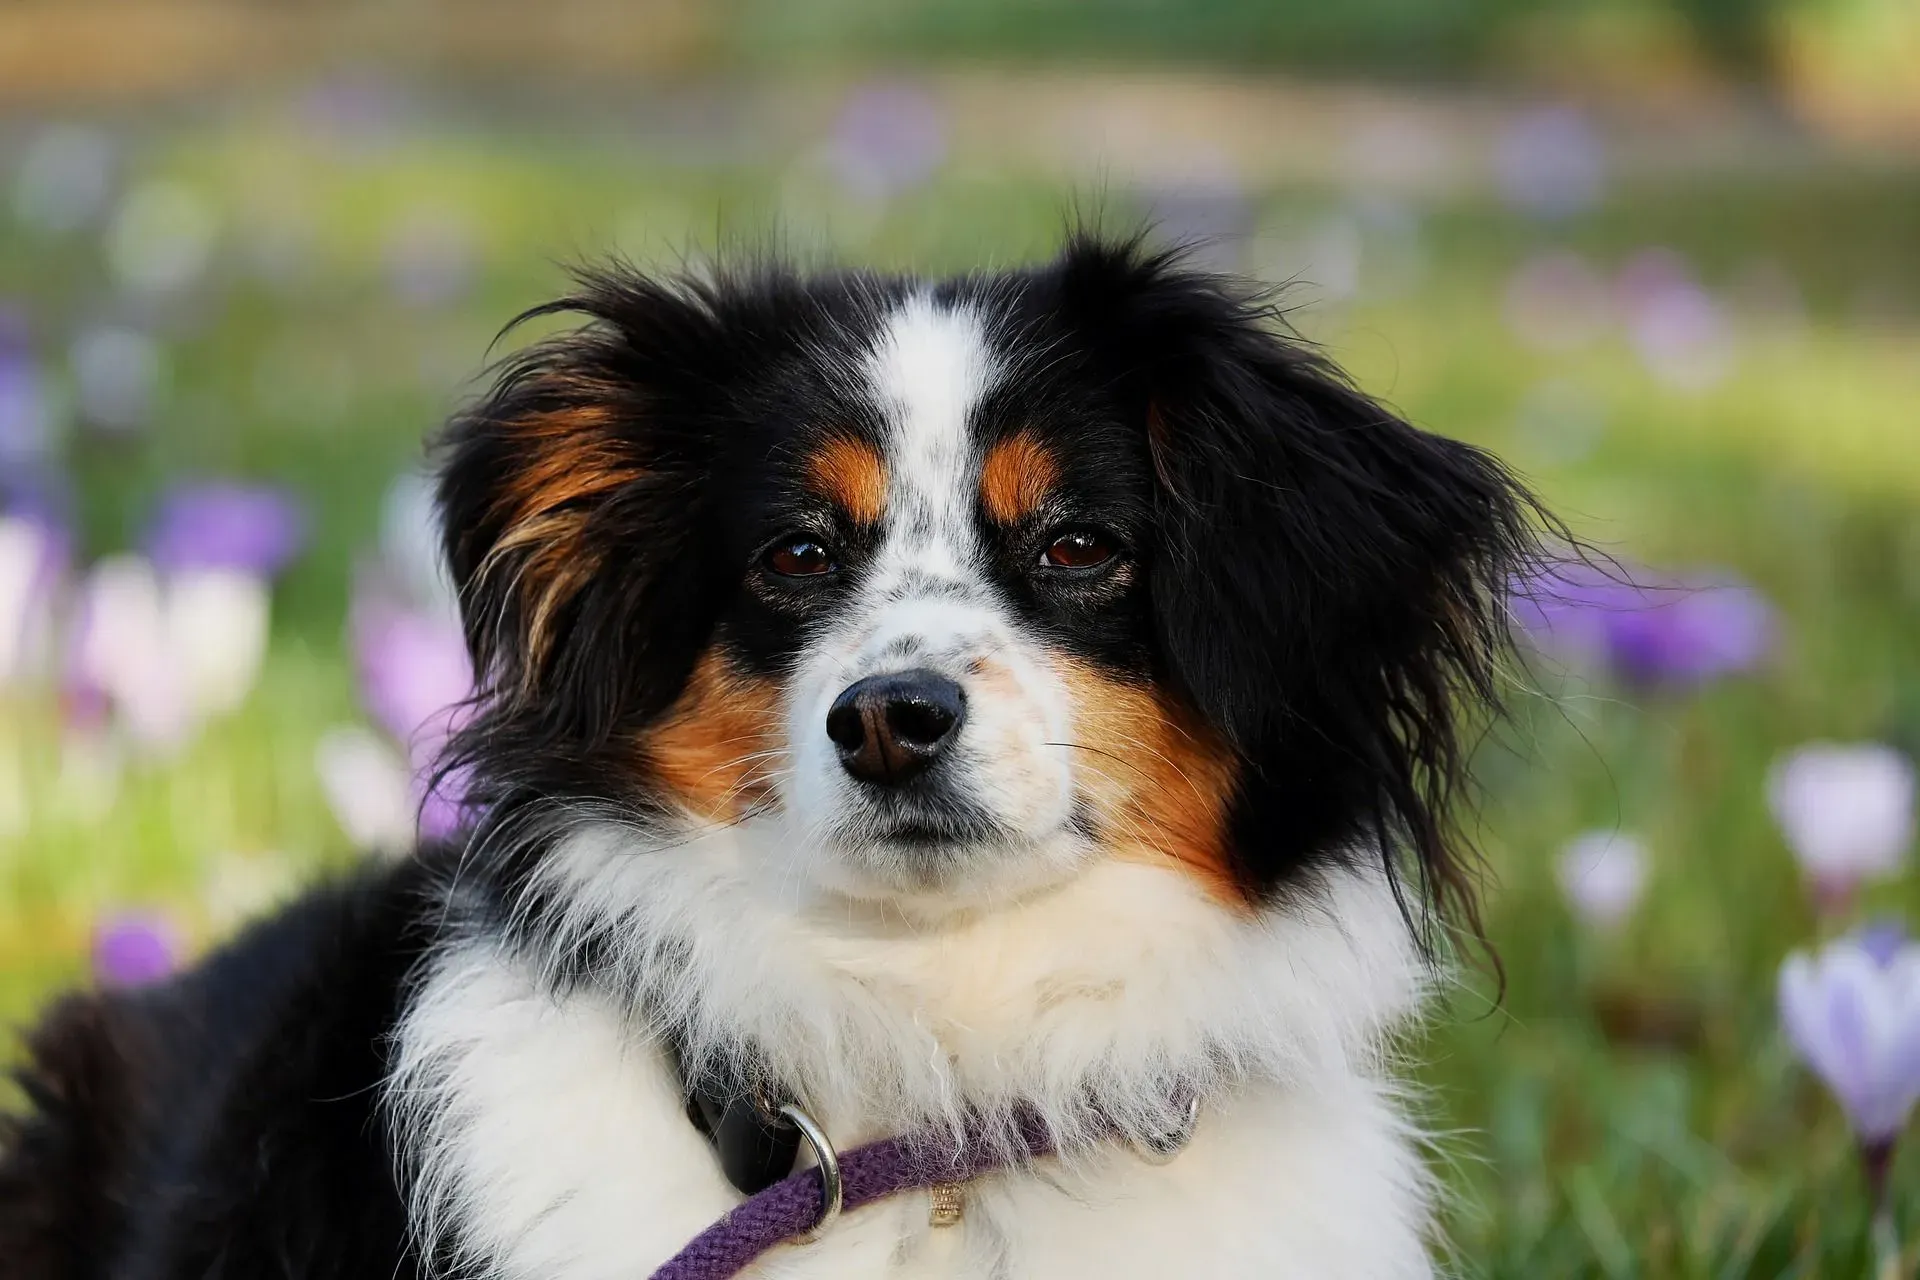 Australian shepherd grooming tips are essential for their double coat.